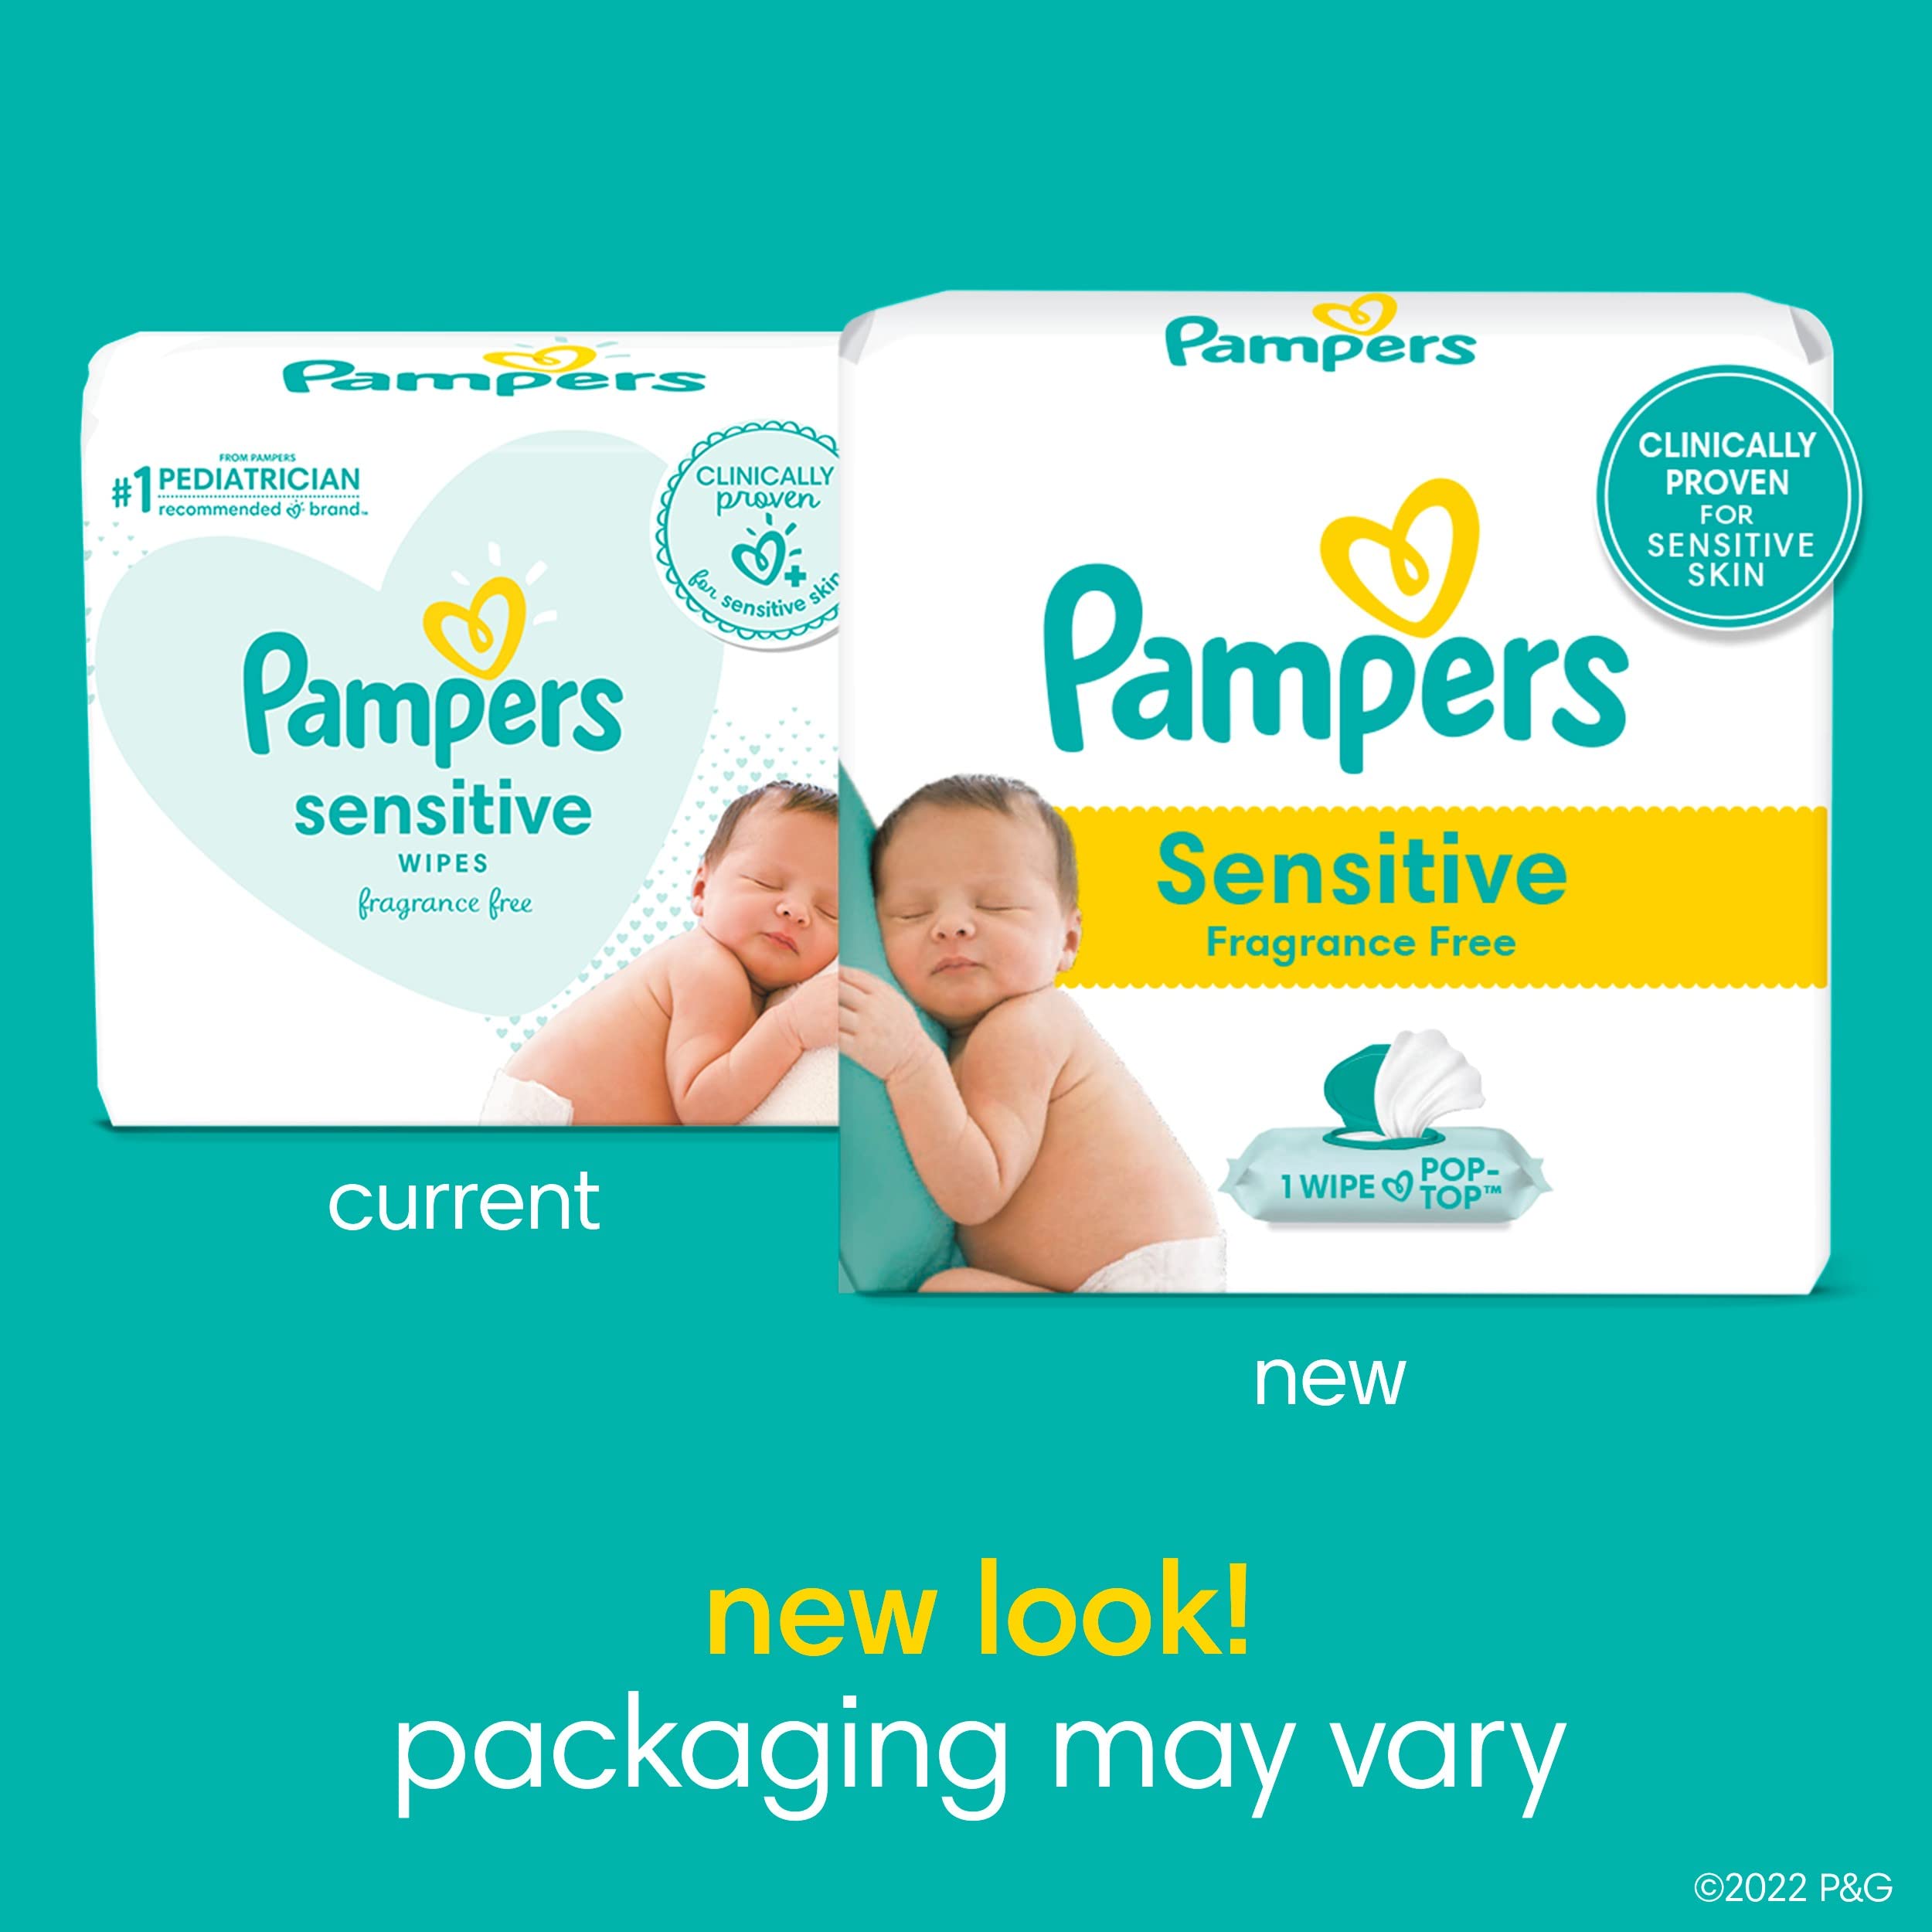 Baby Wipes, Pampers Sensitive Water Based Baby Diaper Wipes, Hypoallergenic and Unscented, 8 Pop-Top Packs with 4 Refill Packs for Dispenser Tub, 864 Total Wipes (Packaging May Vary)